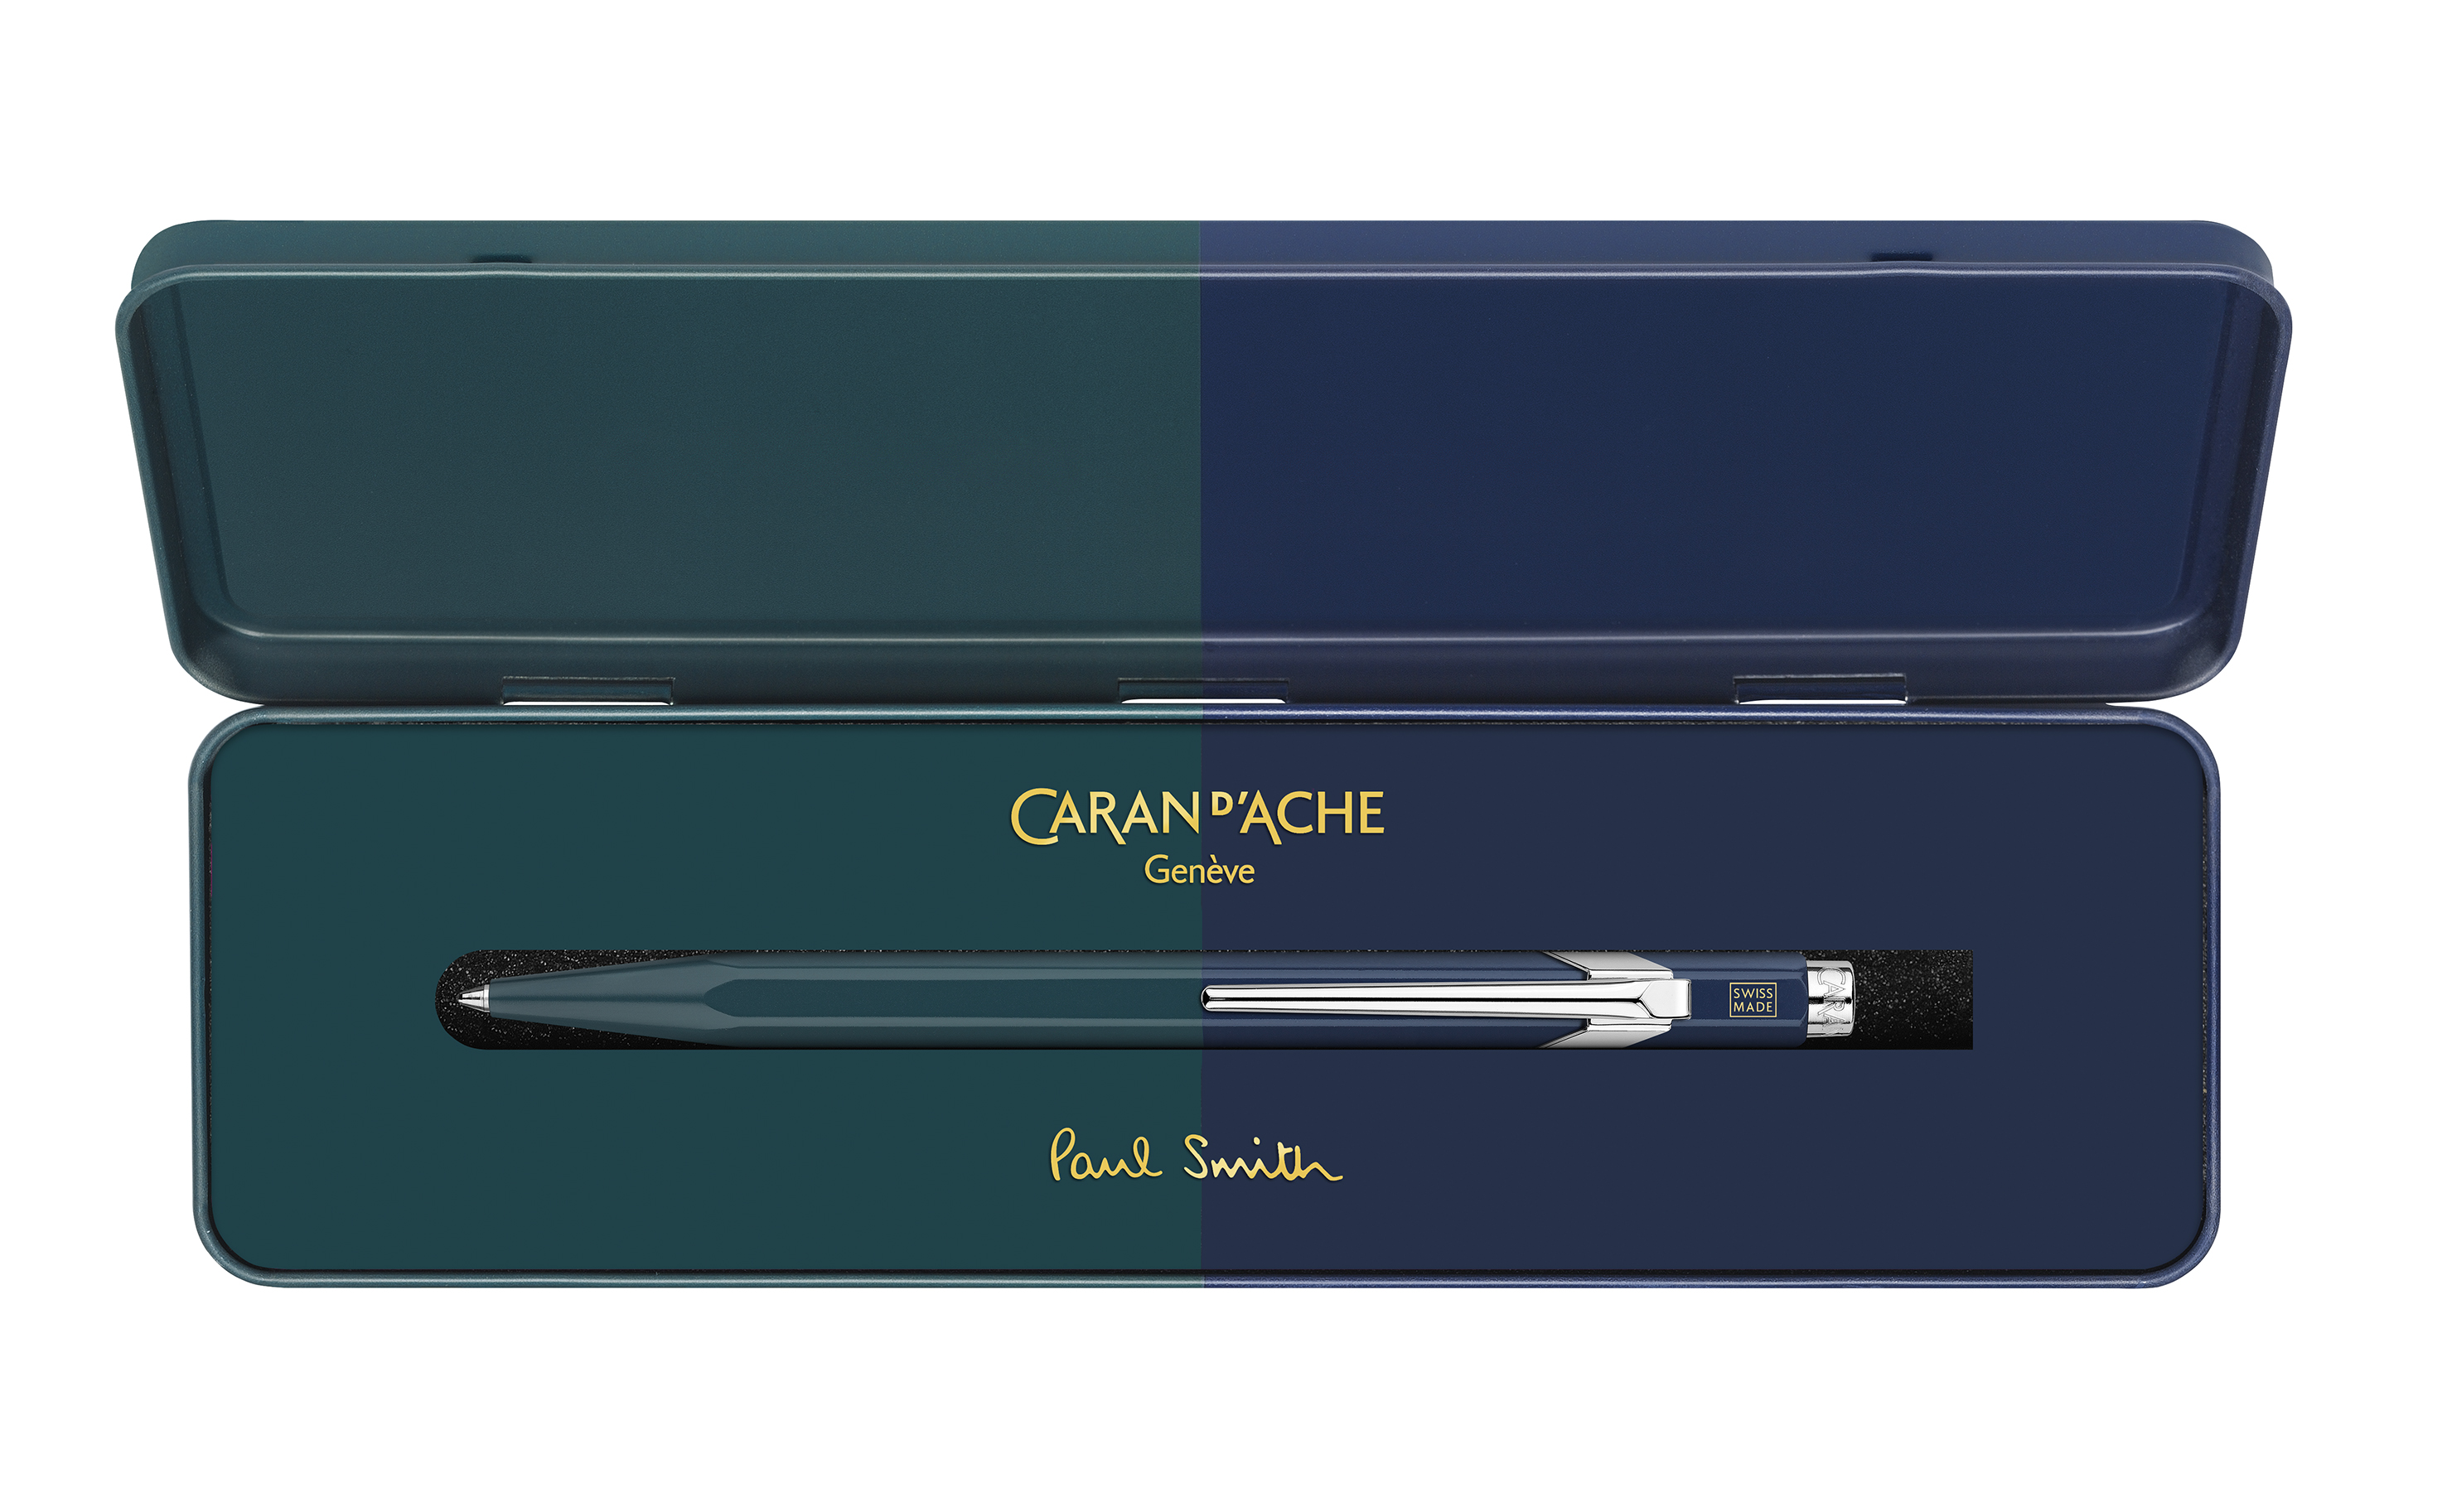 ballpoint pen 849 collaboration paul smith fourth edition colours racing green and navy in its metal case